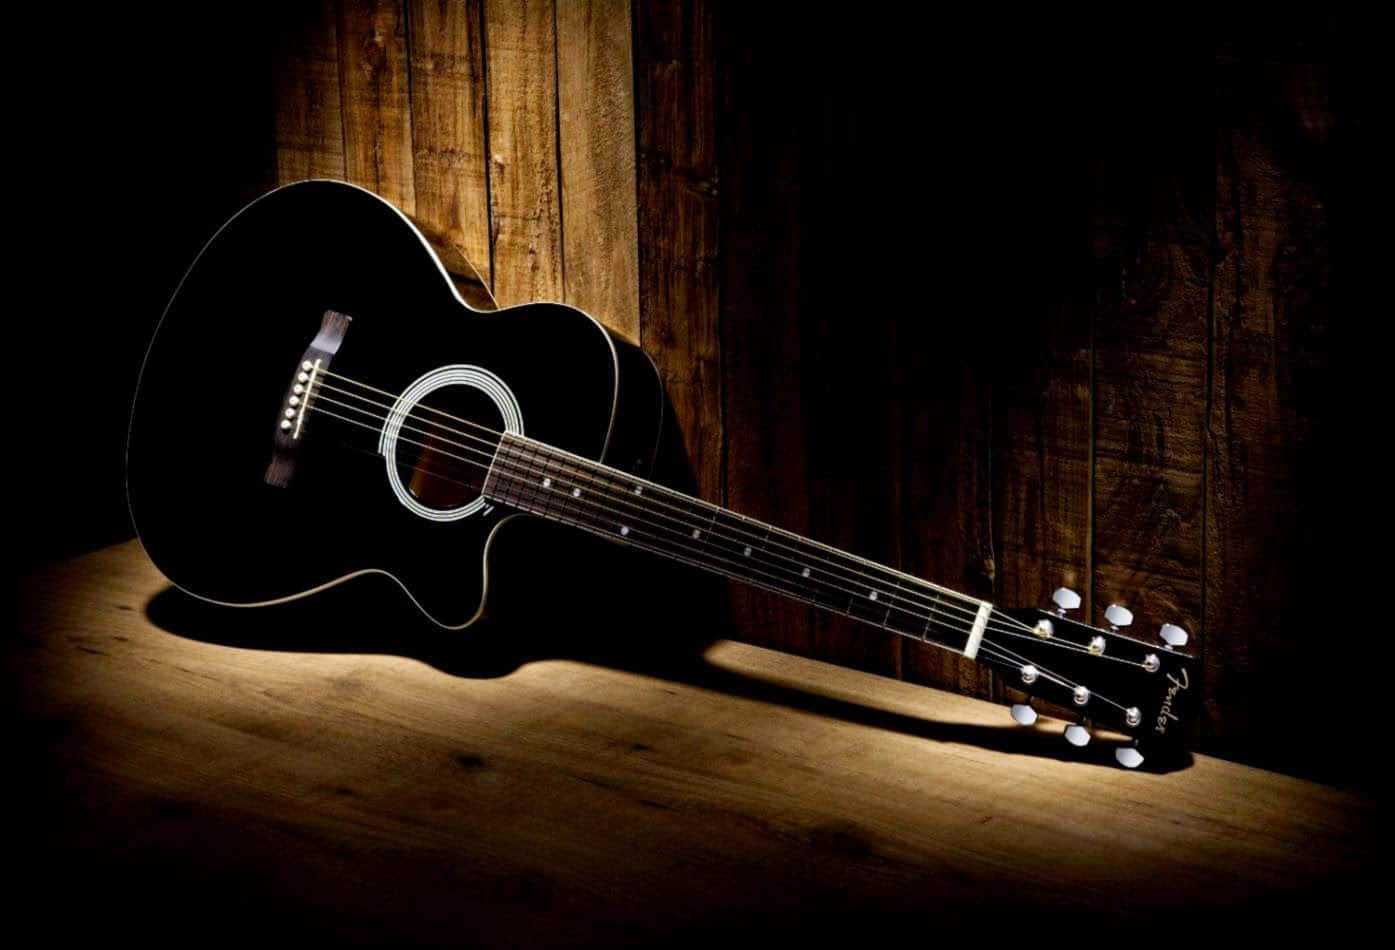 A Black Acoustic Guitar Is Sitting On A Wooden Table